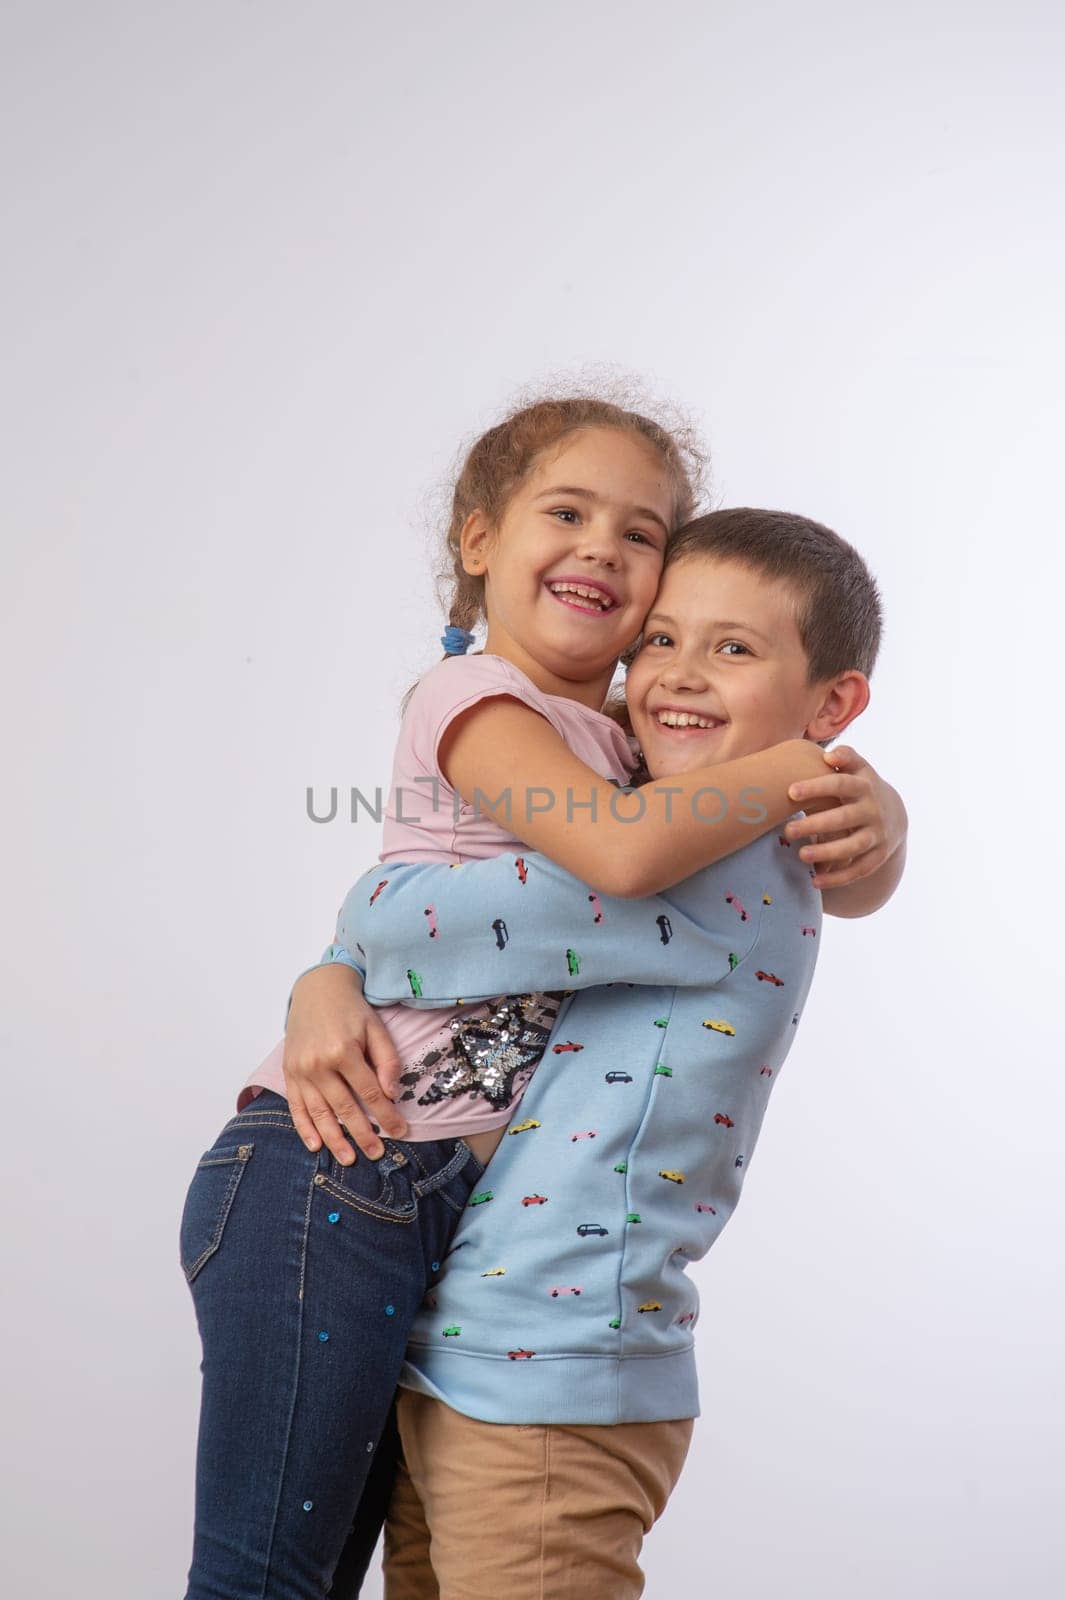 sister hugging brother studio portrait happy family 1 by Mixa74